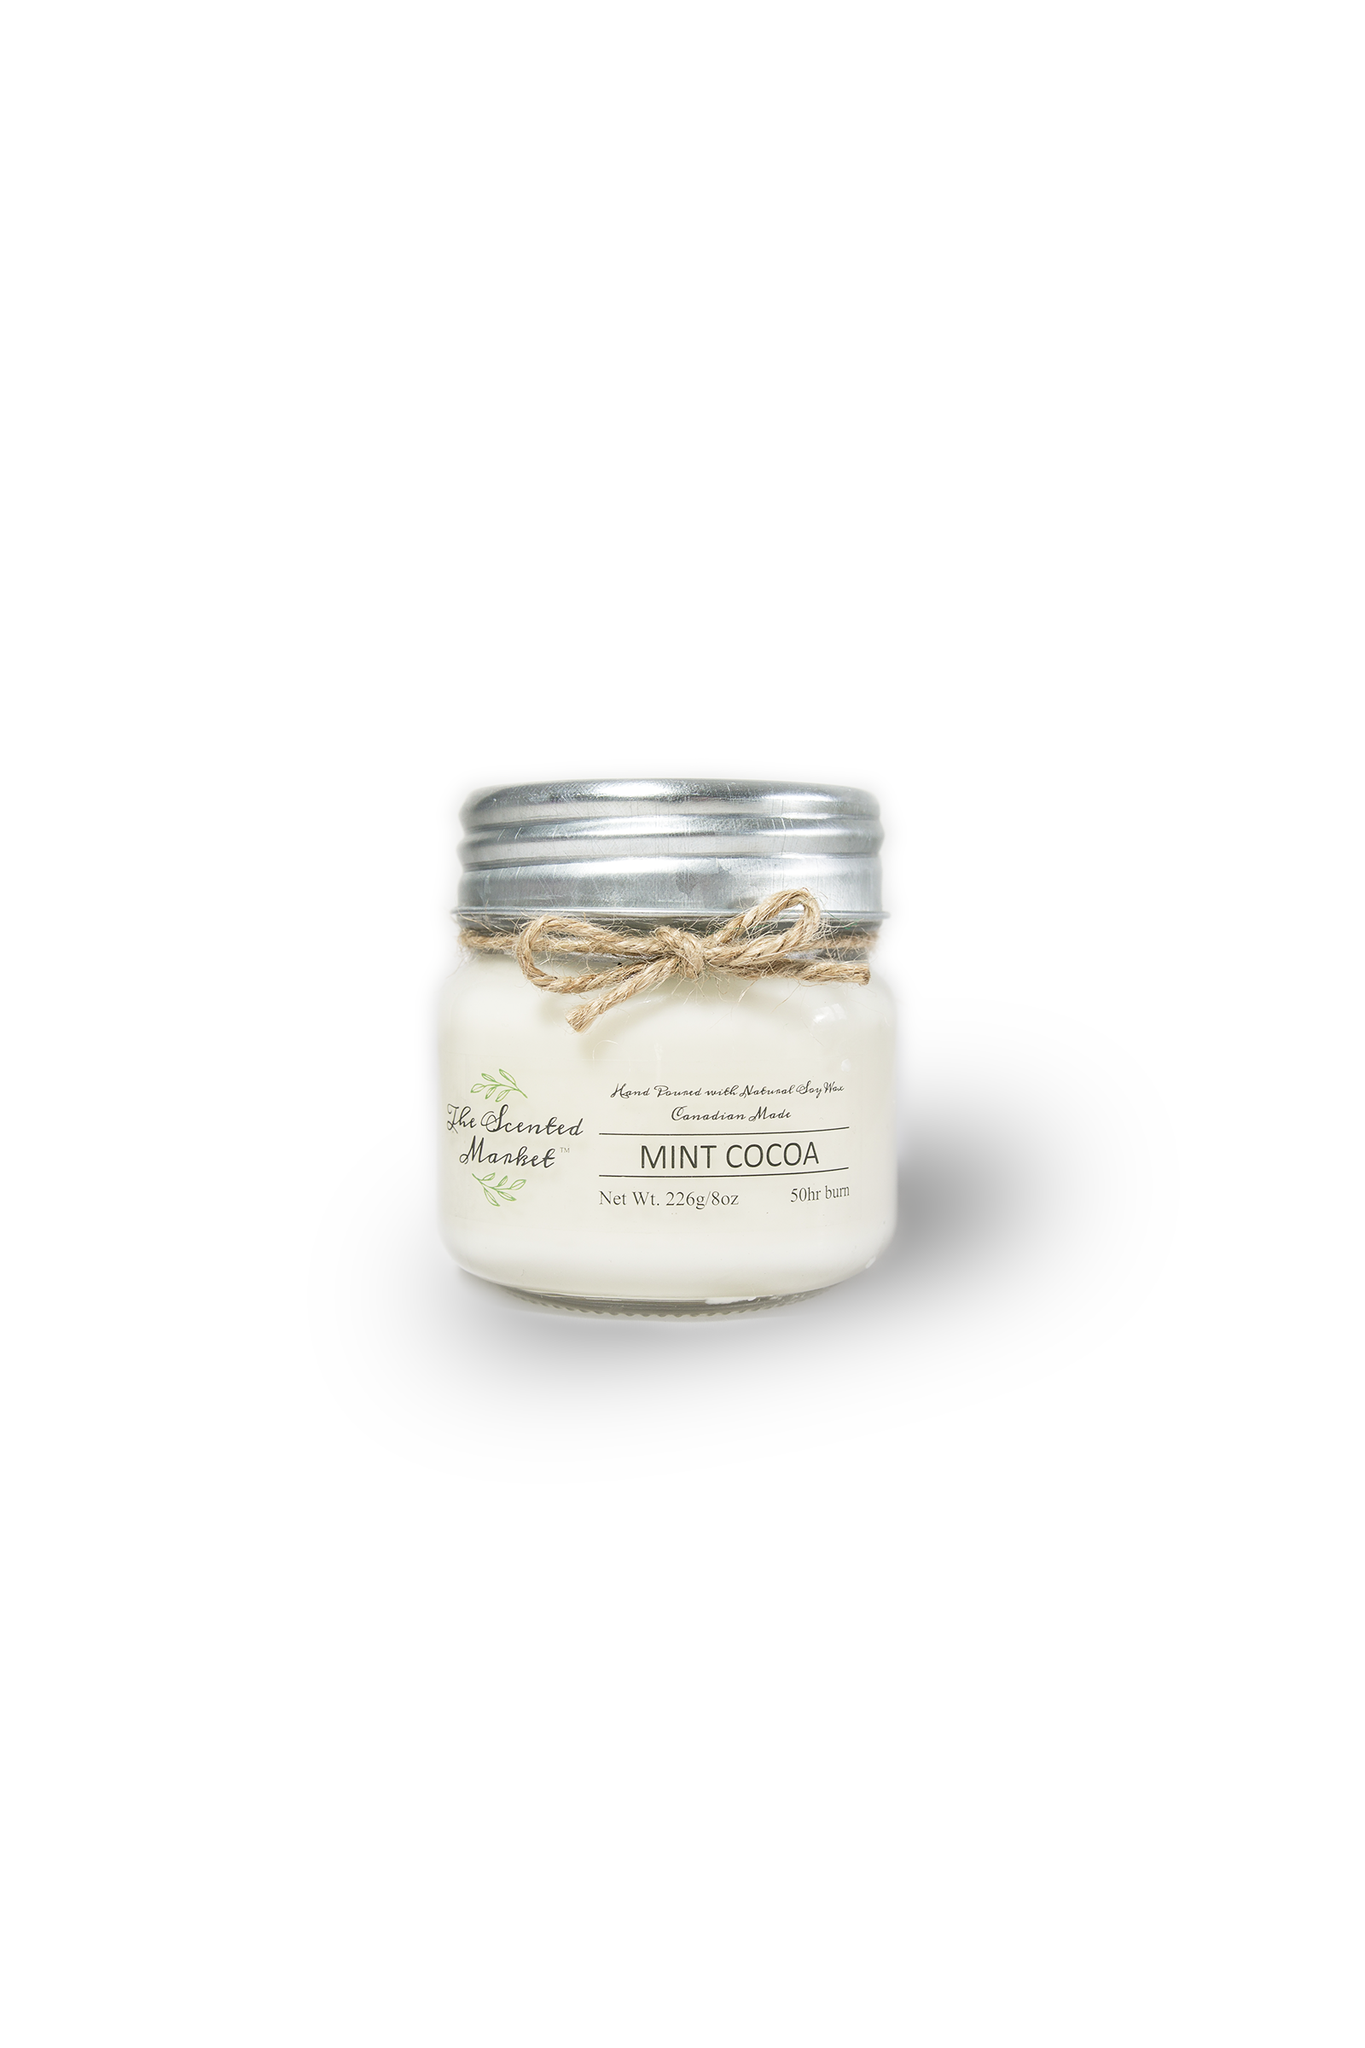 Mint cocoa. Soy wax candle 8oz